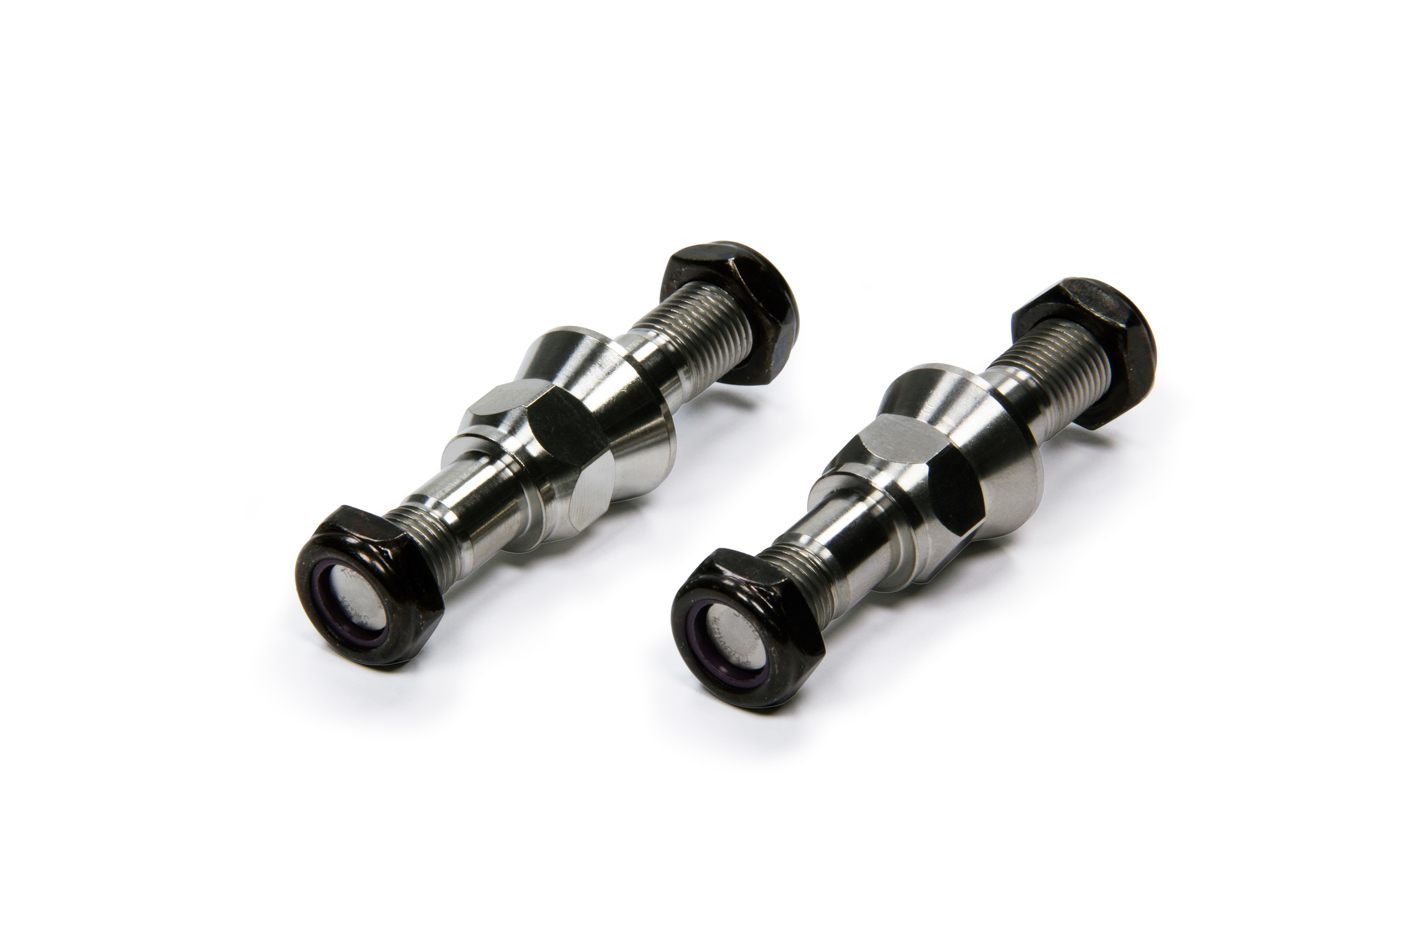 Ti22 Performance 1170 Shock Mount Stud, 1/2-20 in Thread, 2 in Long, Large Support Cone, Four Locking Nuts / Two Studs Included, Titanium, Natural, Rear Torsion Arms, Sprint Car, Kit